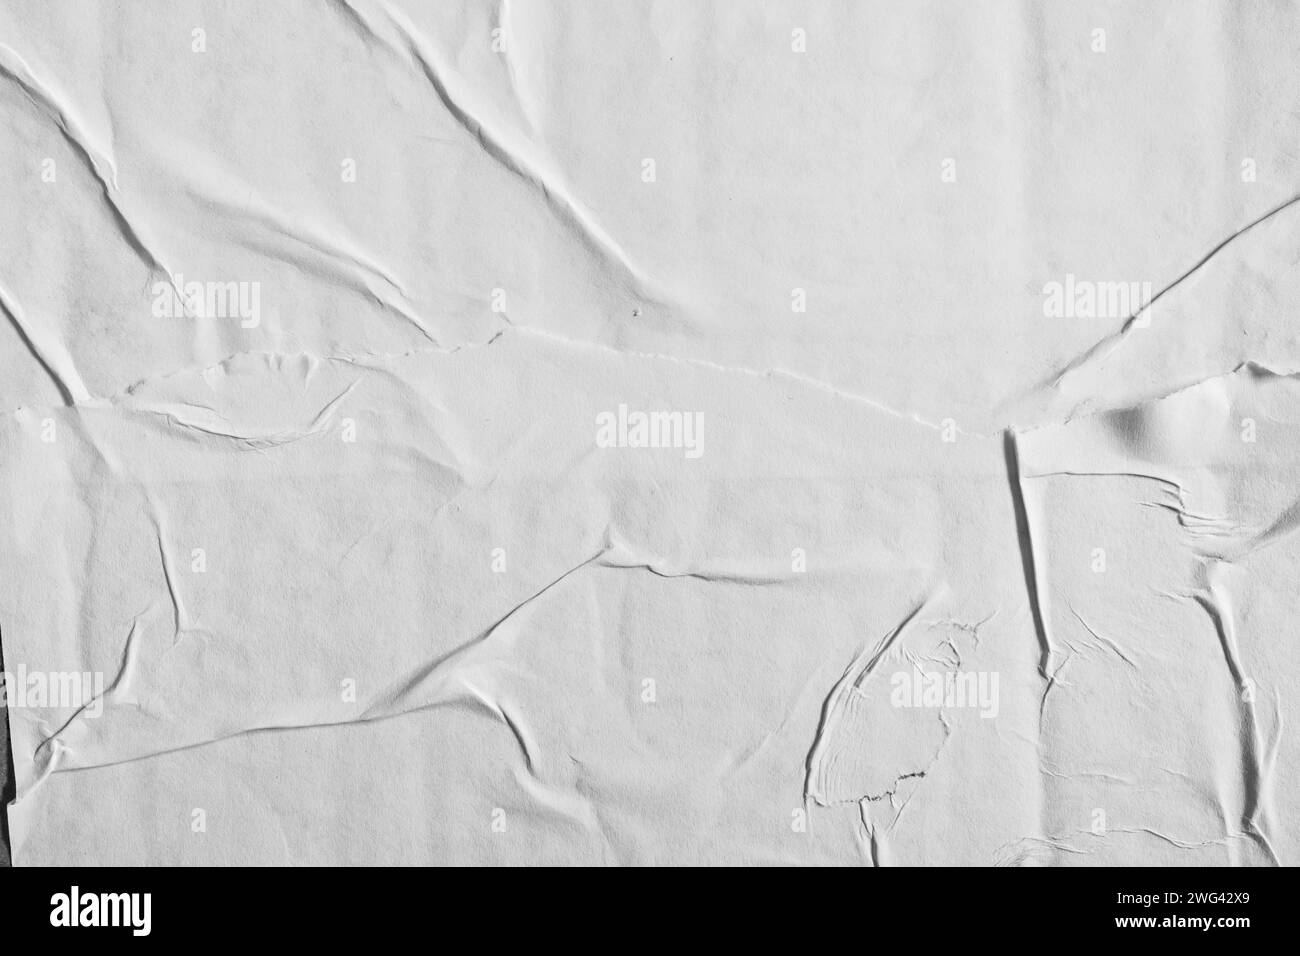 White damaged paper poster texture background Stock Photo